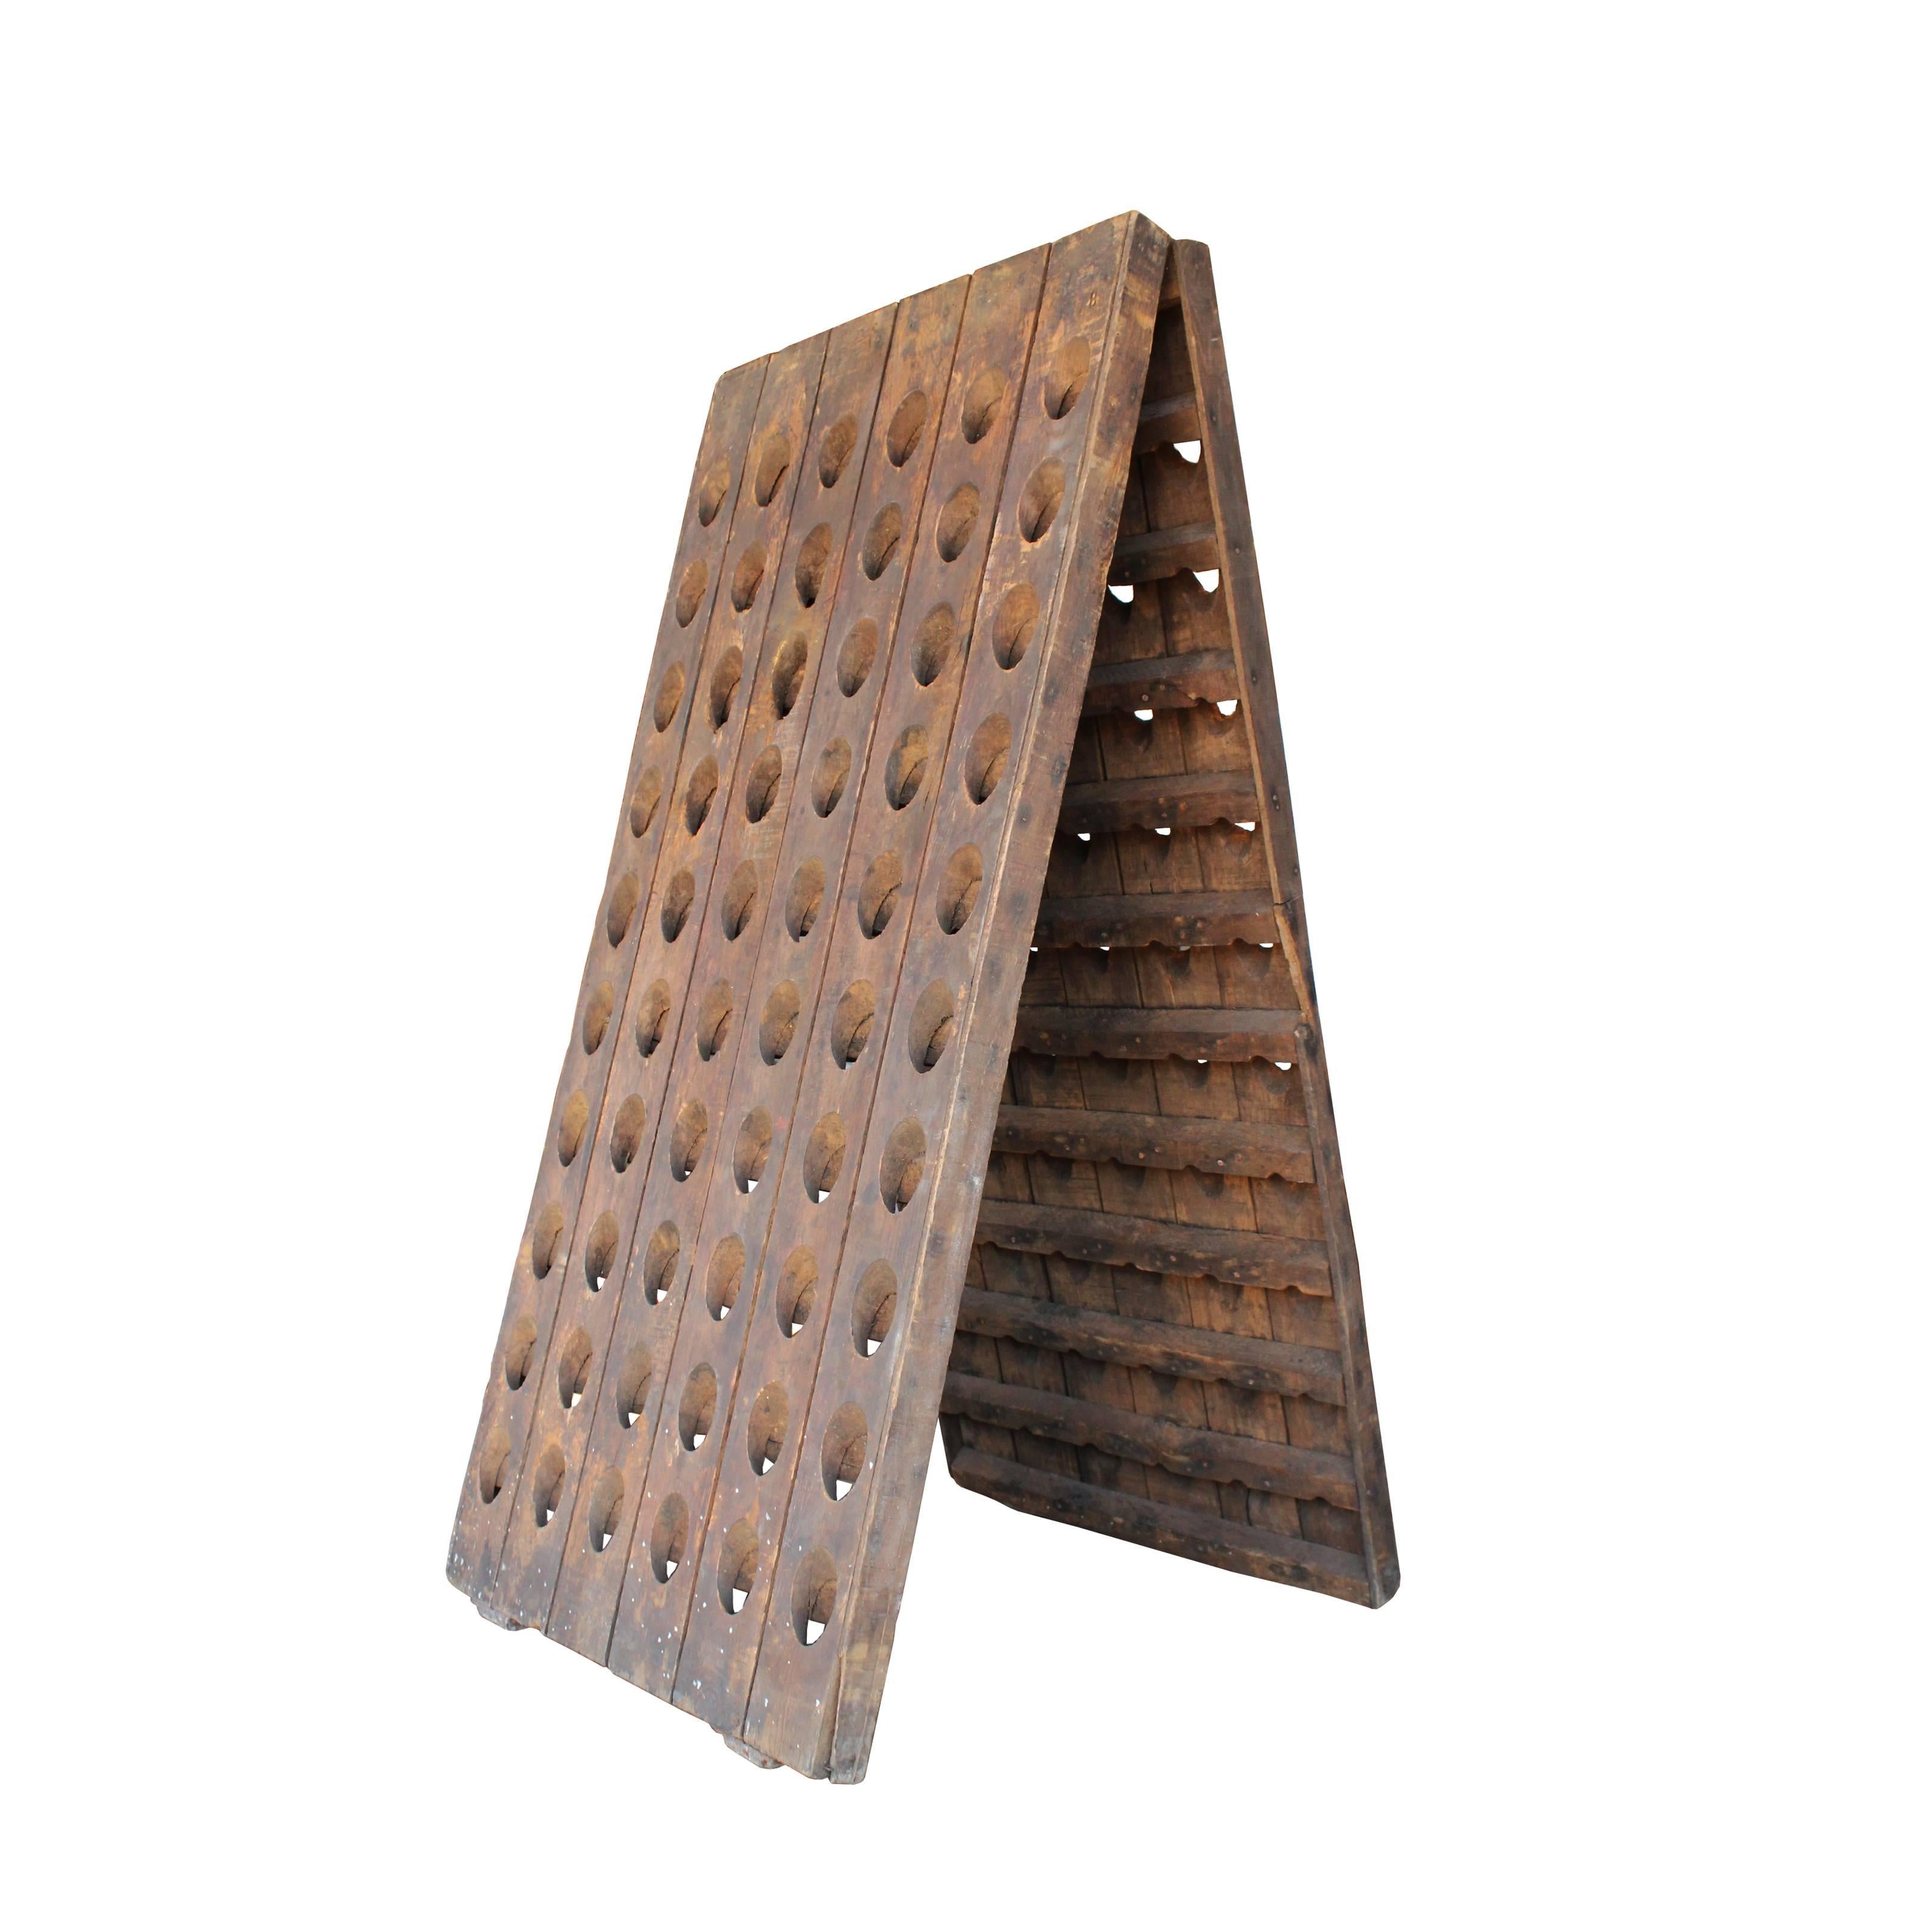 Used in the production of champagne to aid in the removal of sediment and yeast from the fermentation process, the riddling rack has long been an indispensable tool to vintners. This A-frame style hardwood rack has space for 120 bottles.